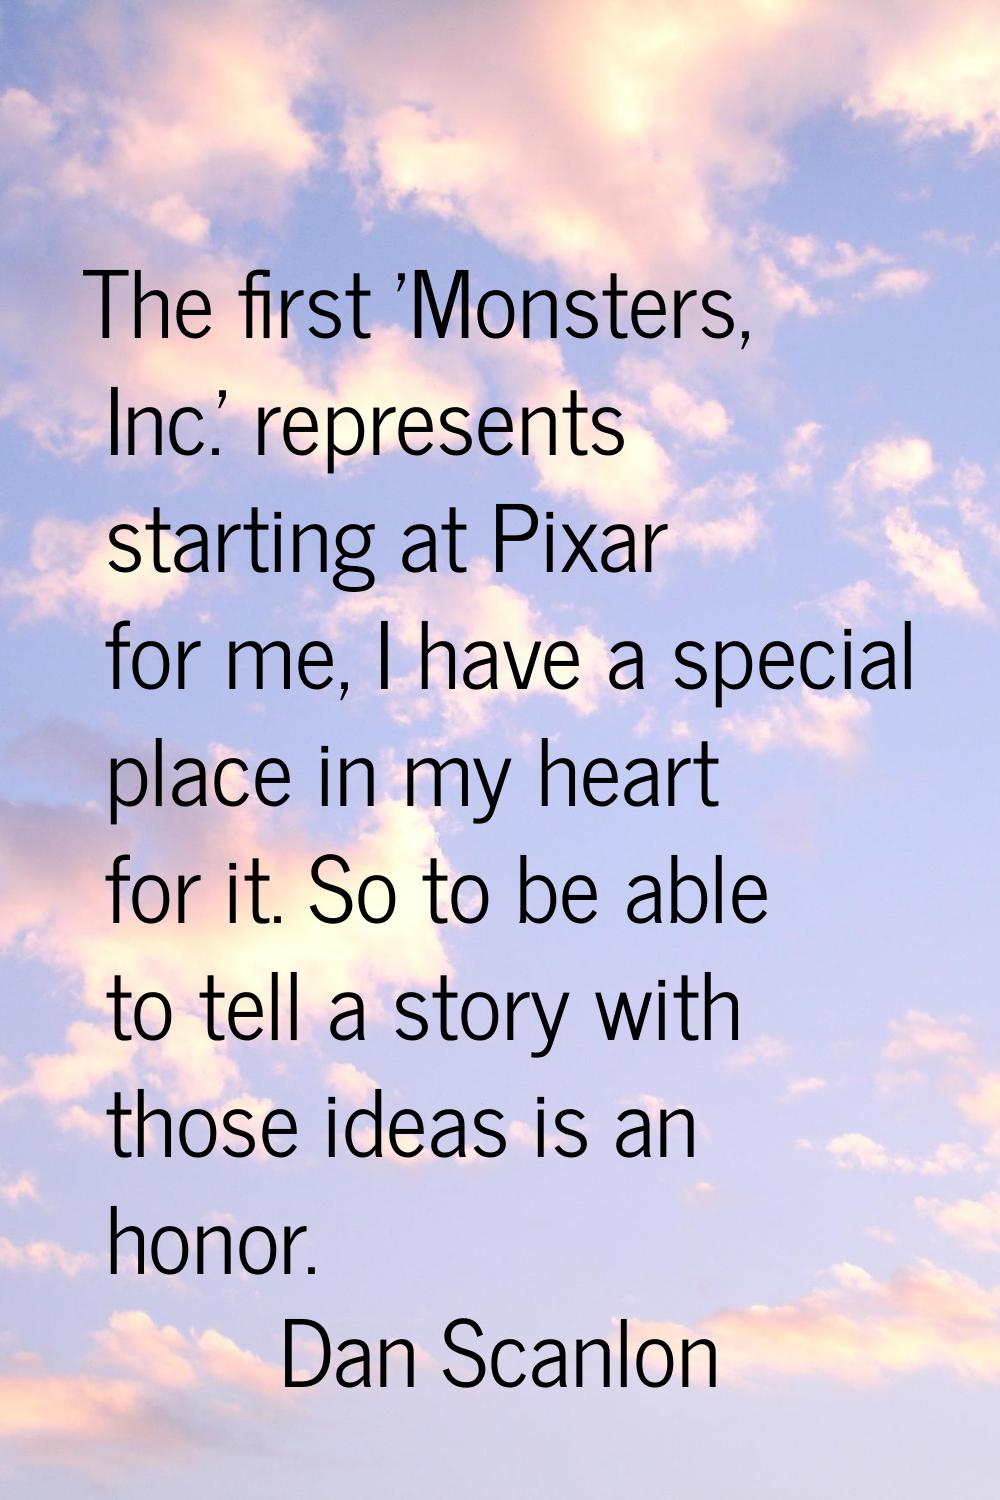 The first 'Monsters, Inc.' represents starting at Pixar for me, I have a special place in my heart 